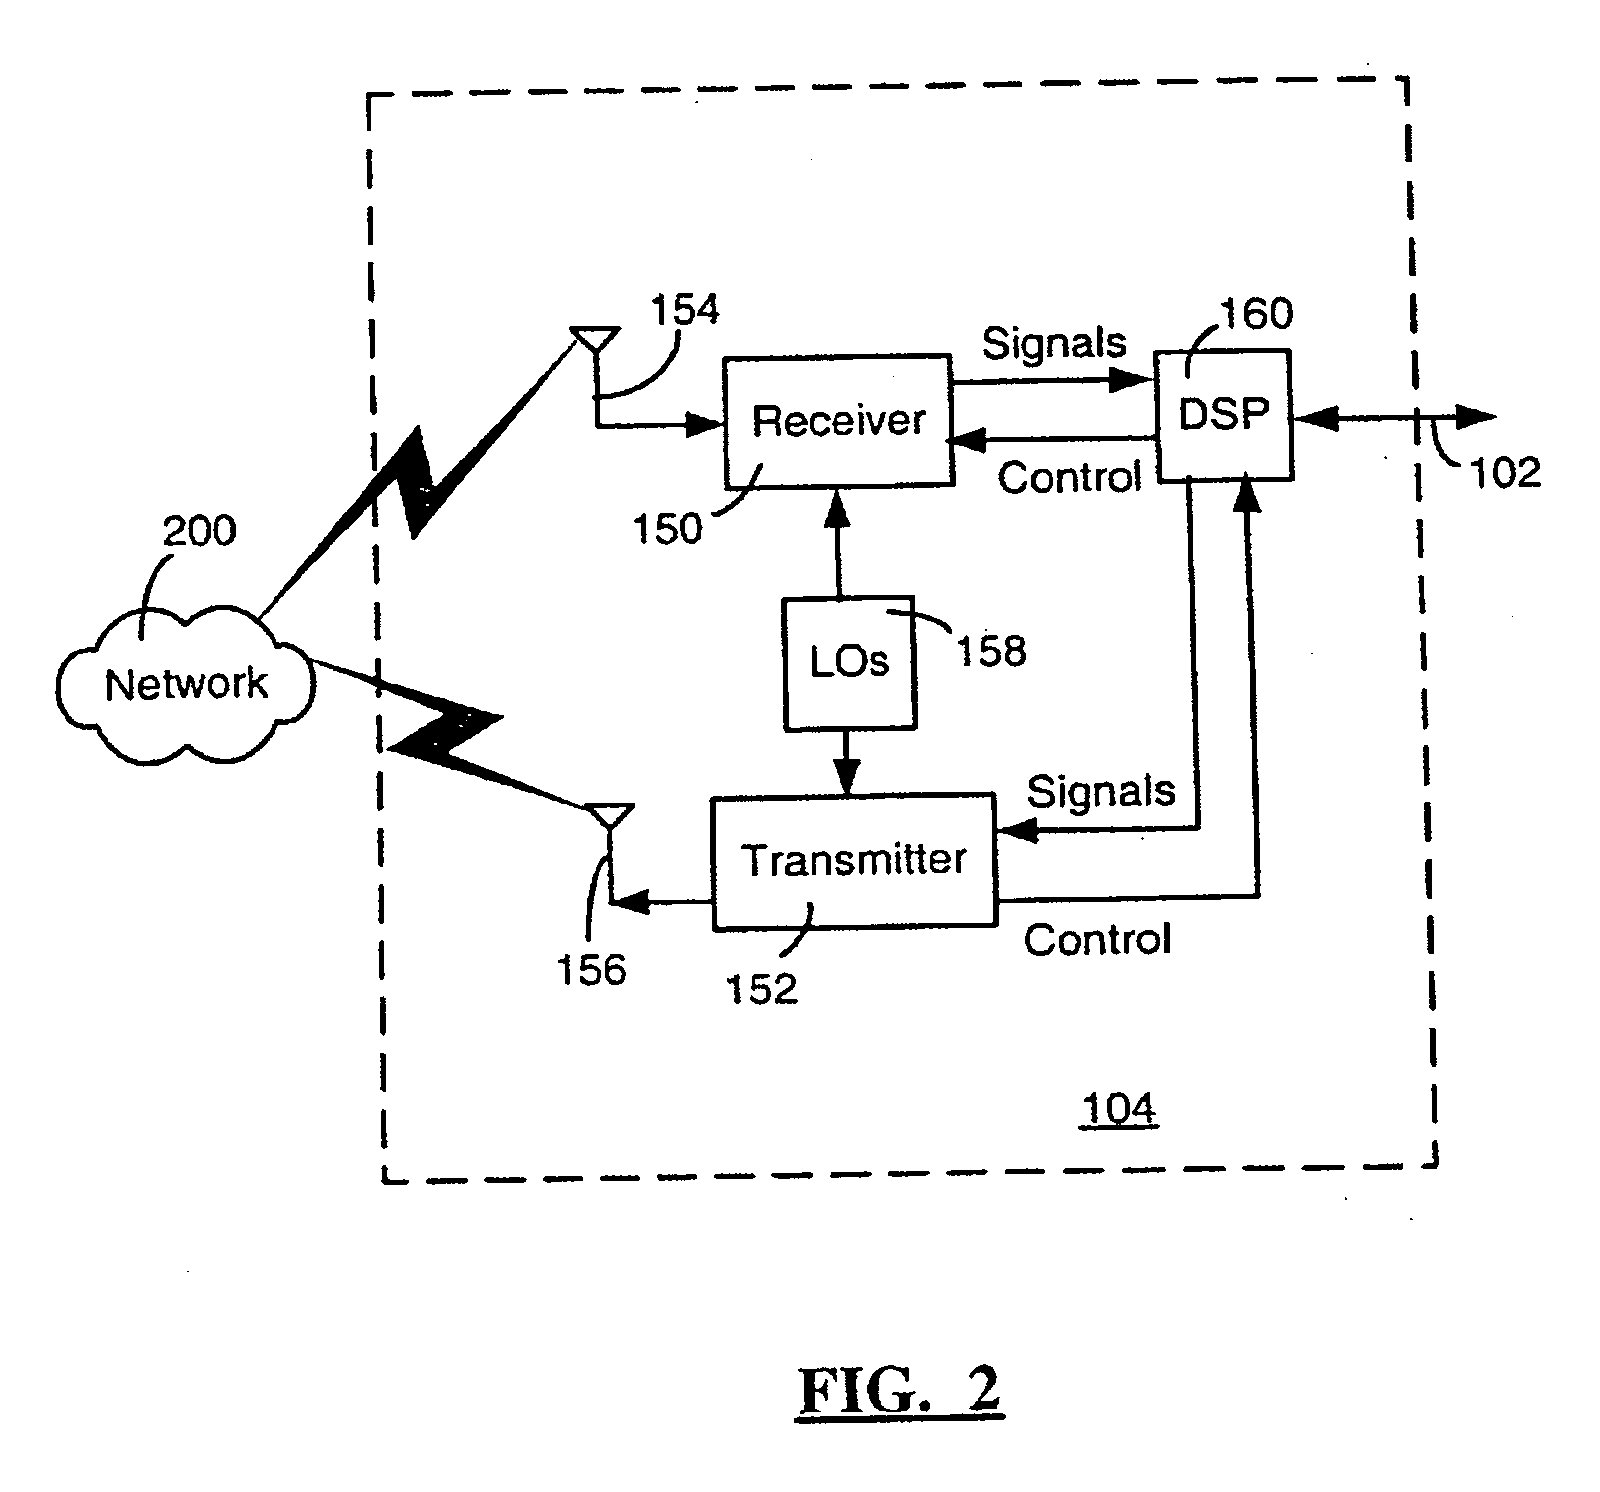 Remote hash generation in a system and method for providing code signing services